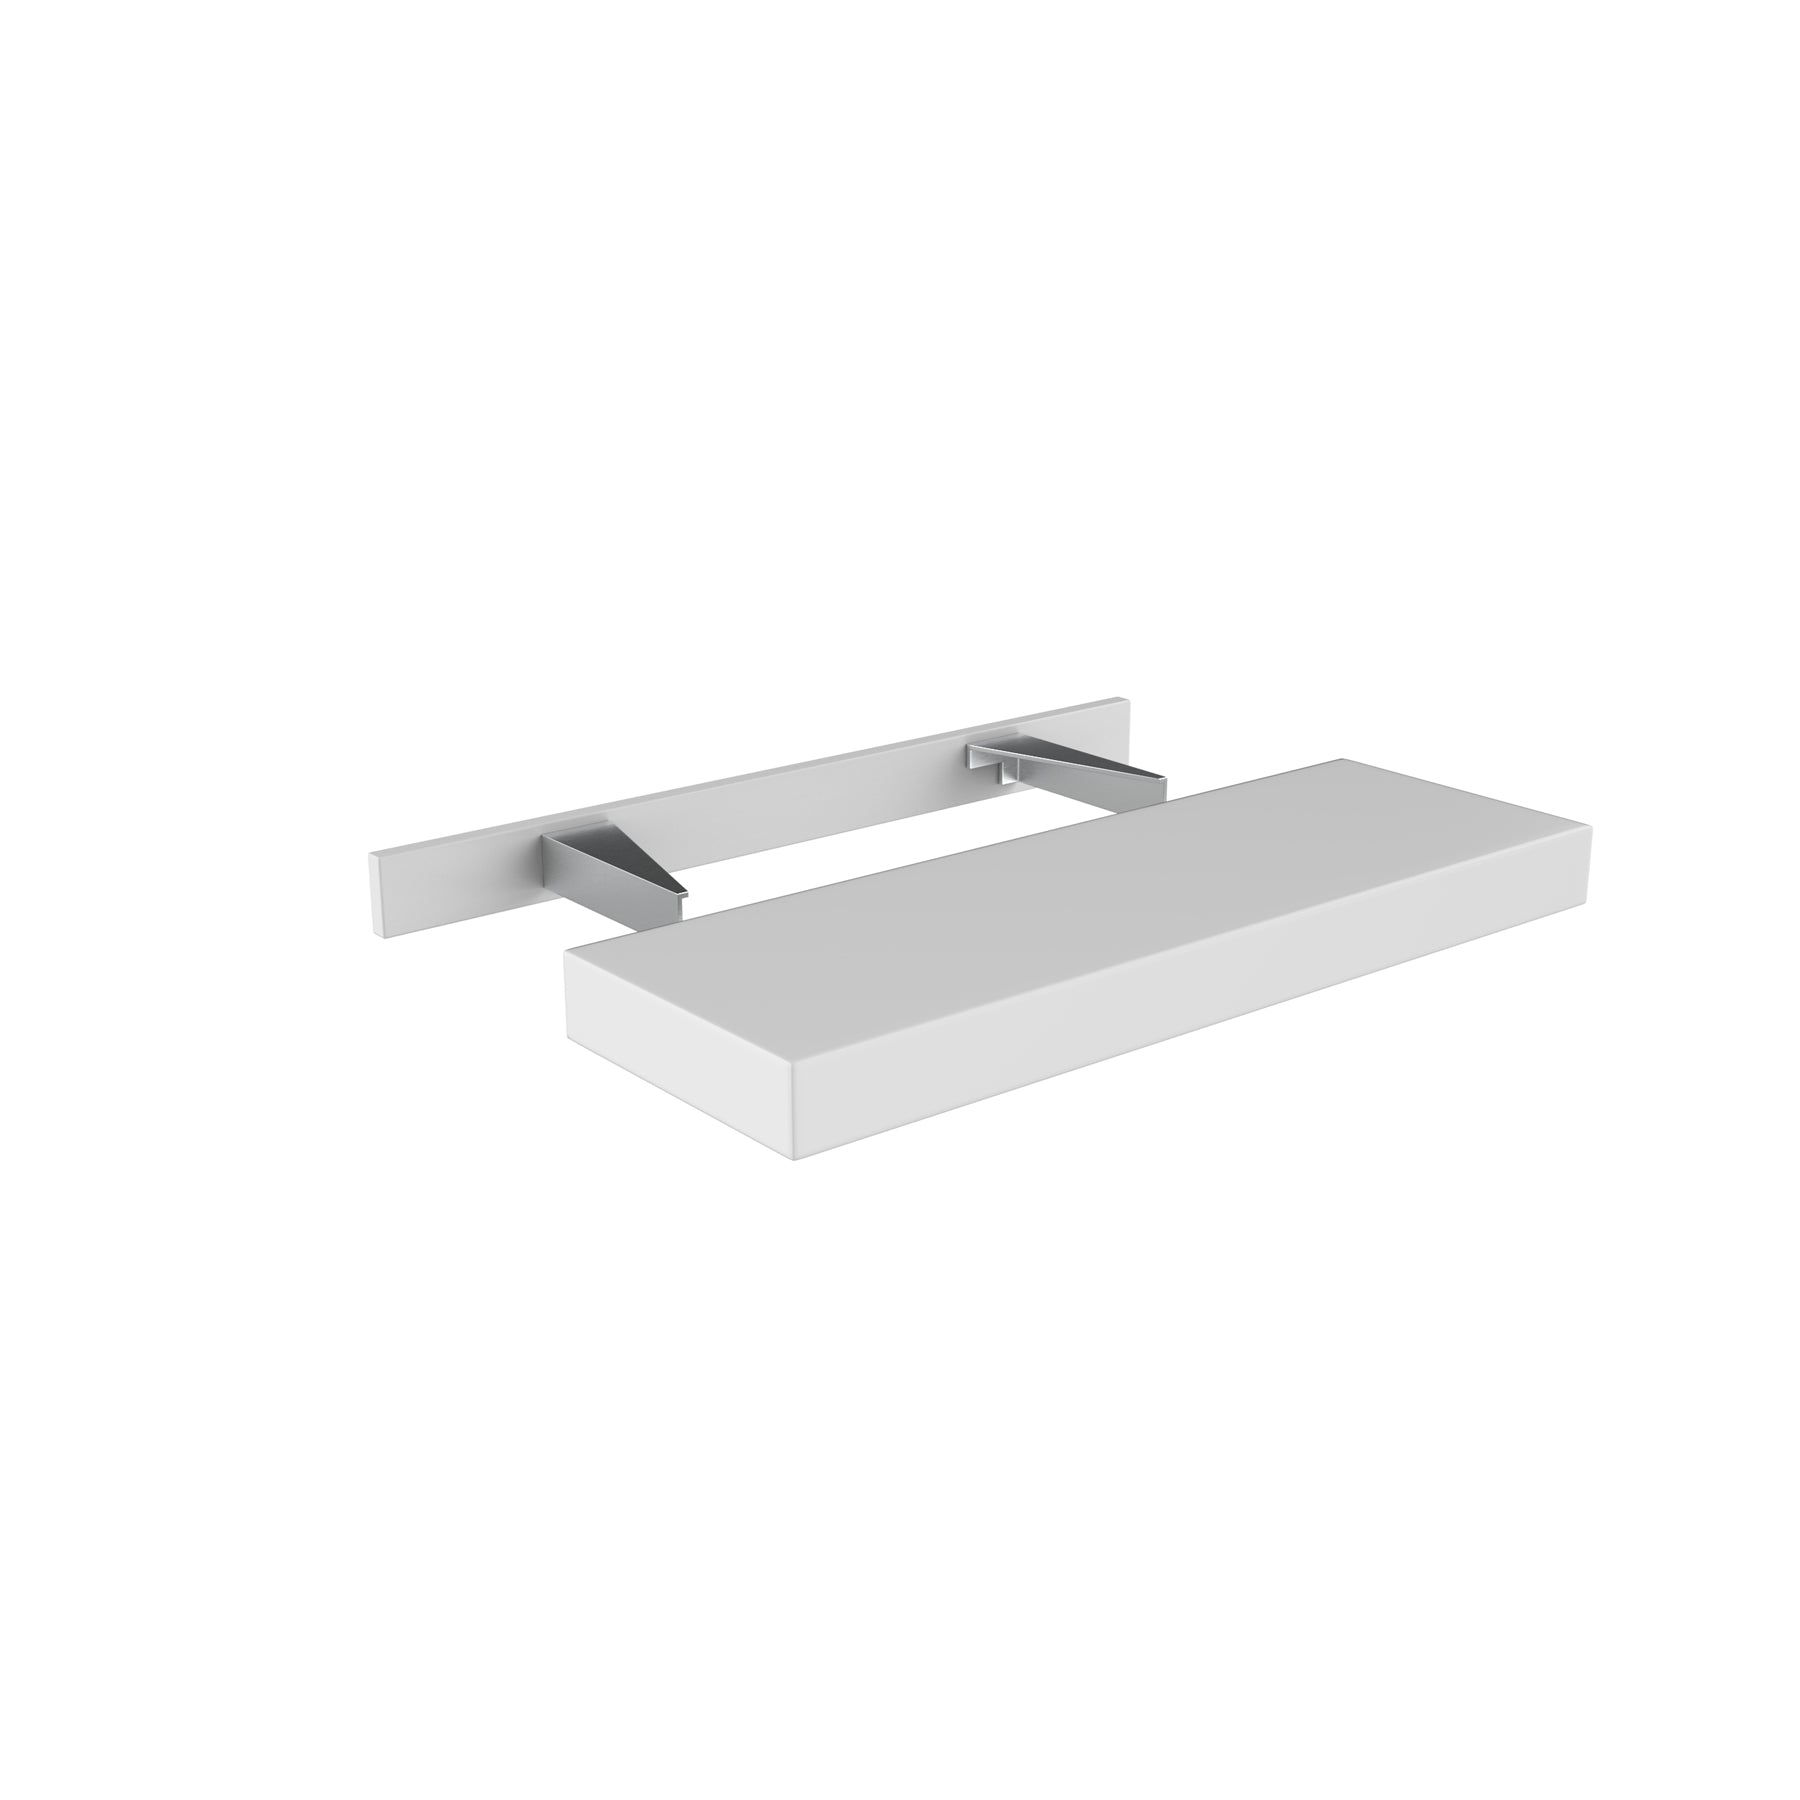 42 Inch Wide Floating Shelf - Luxor White Shaker - Ready To Assemble, 42"W x 2.5"H x 10"D